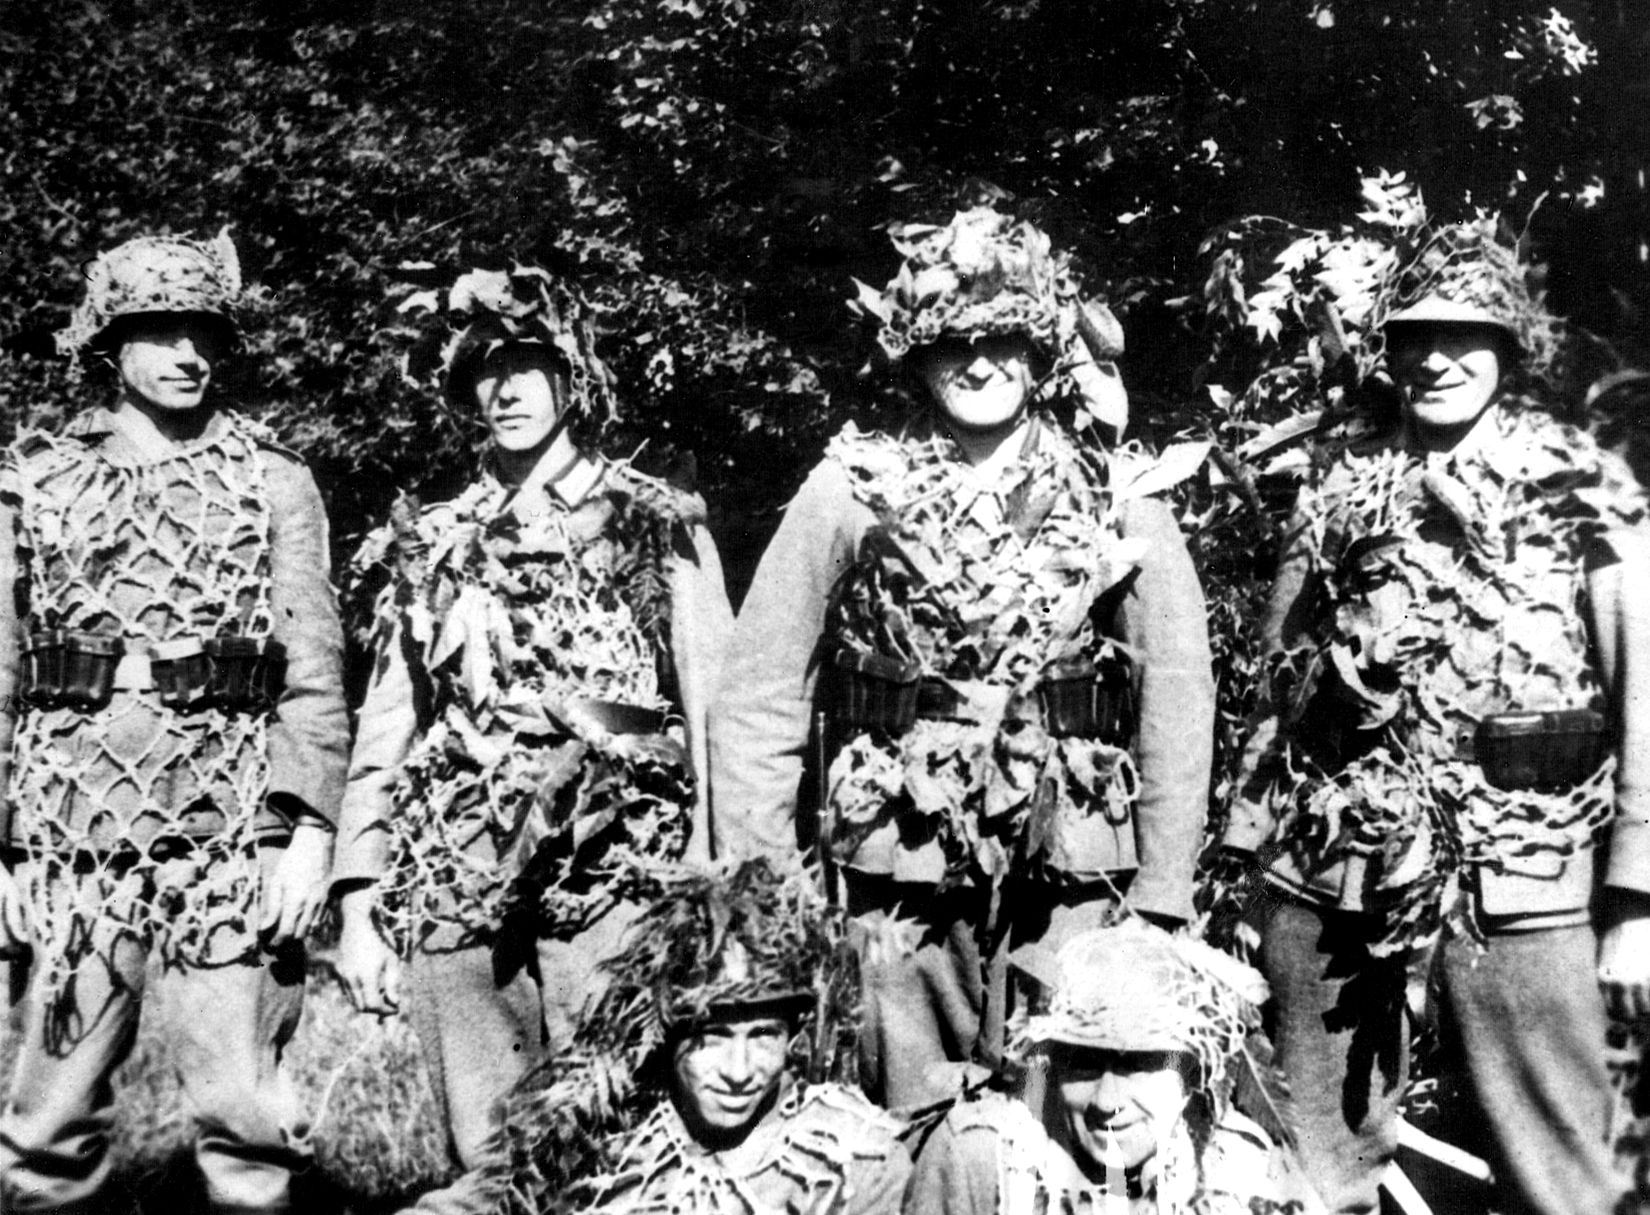 In a photo discarded by retreating German soldiers, Wehrmacht personnel pose wearing camouflaged helmets and smocks over their uniforms.